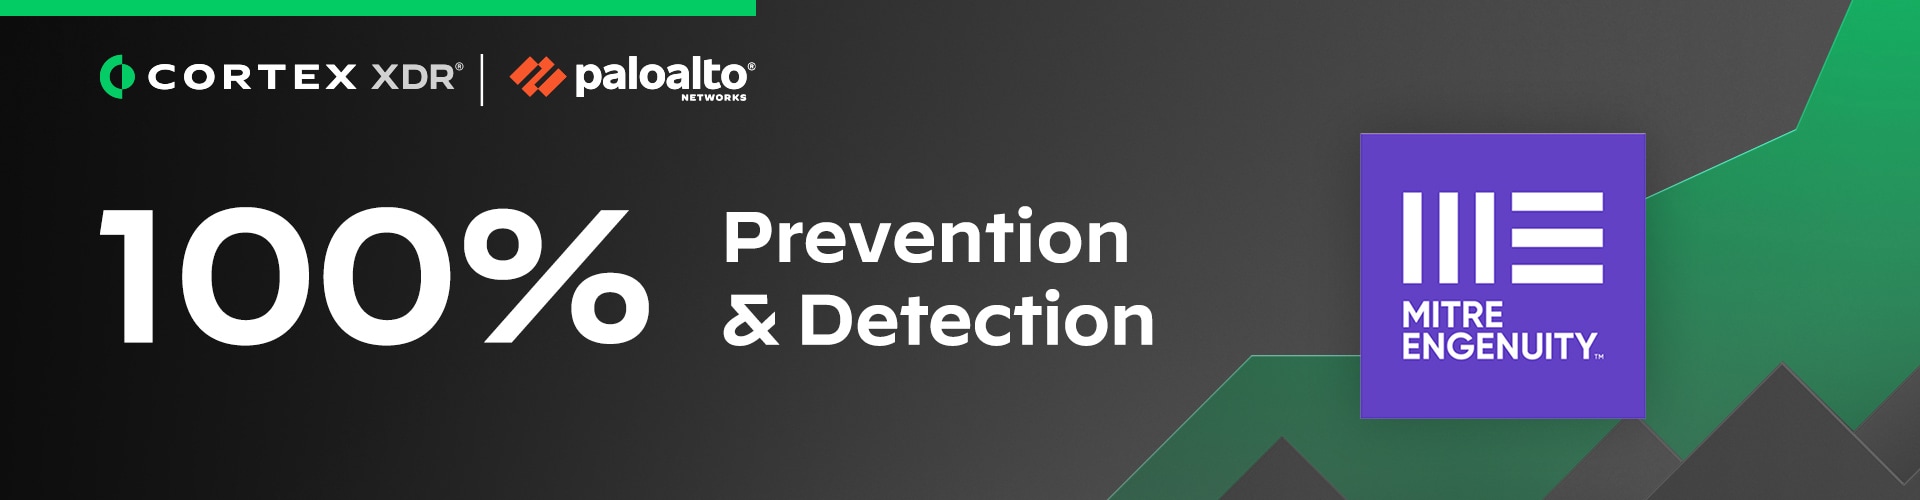 Cortex XDR earned rating of 100% prevention and detection by MITRE Engenuity.